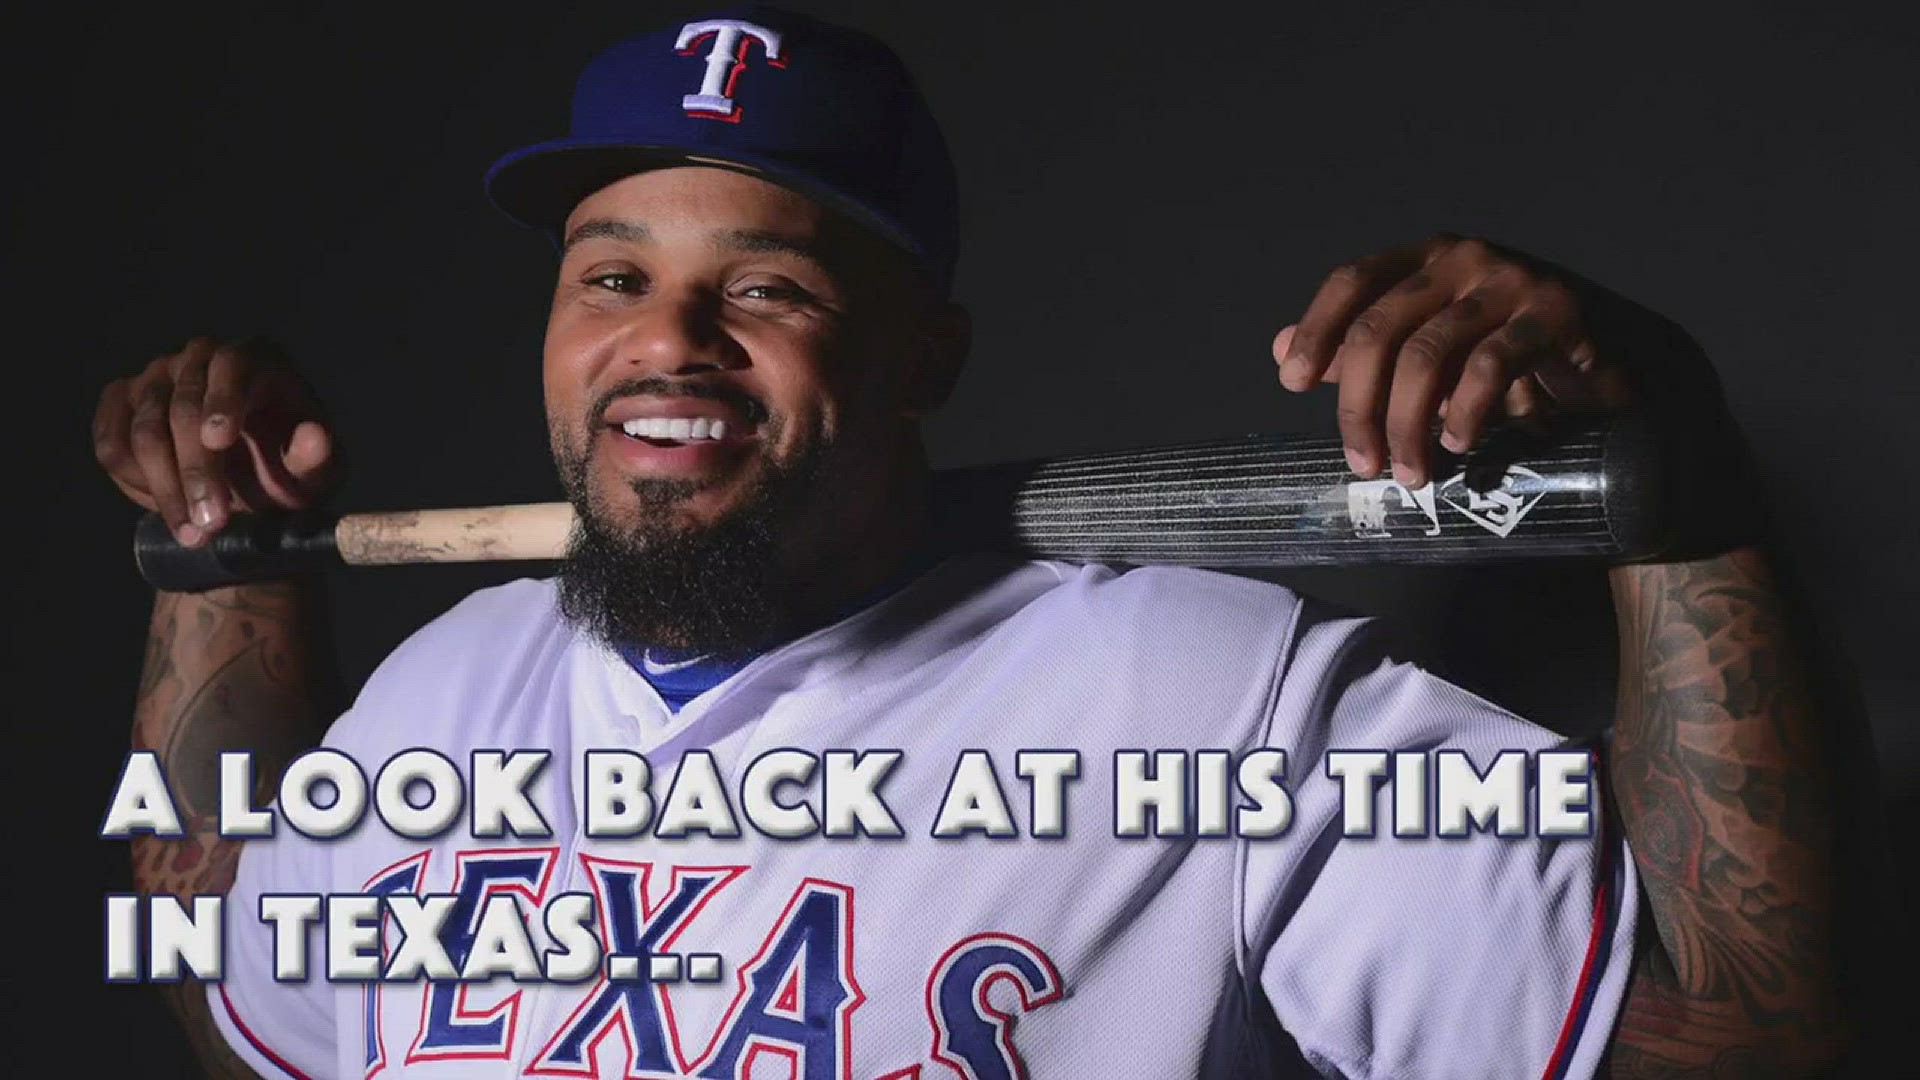 Texas Rangers: Prince Fielder Has Been Officially Released